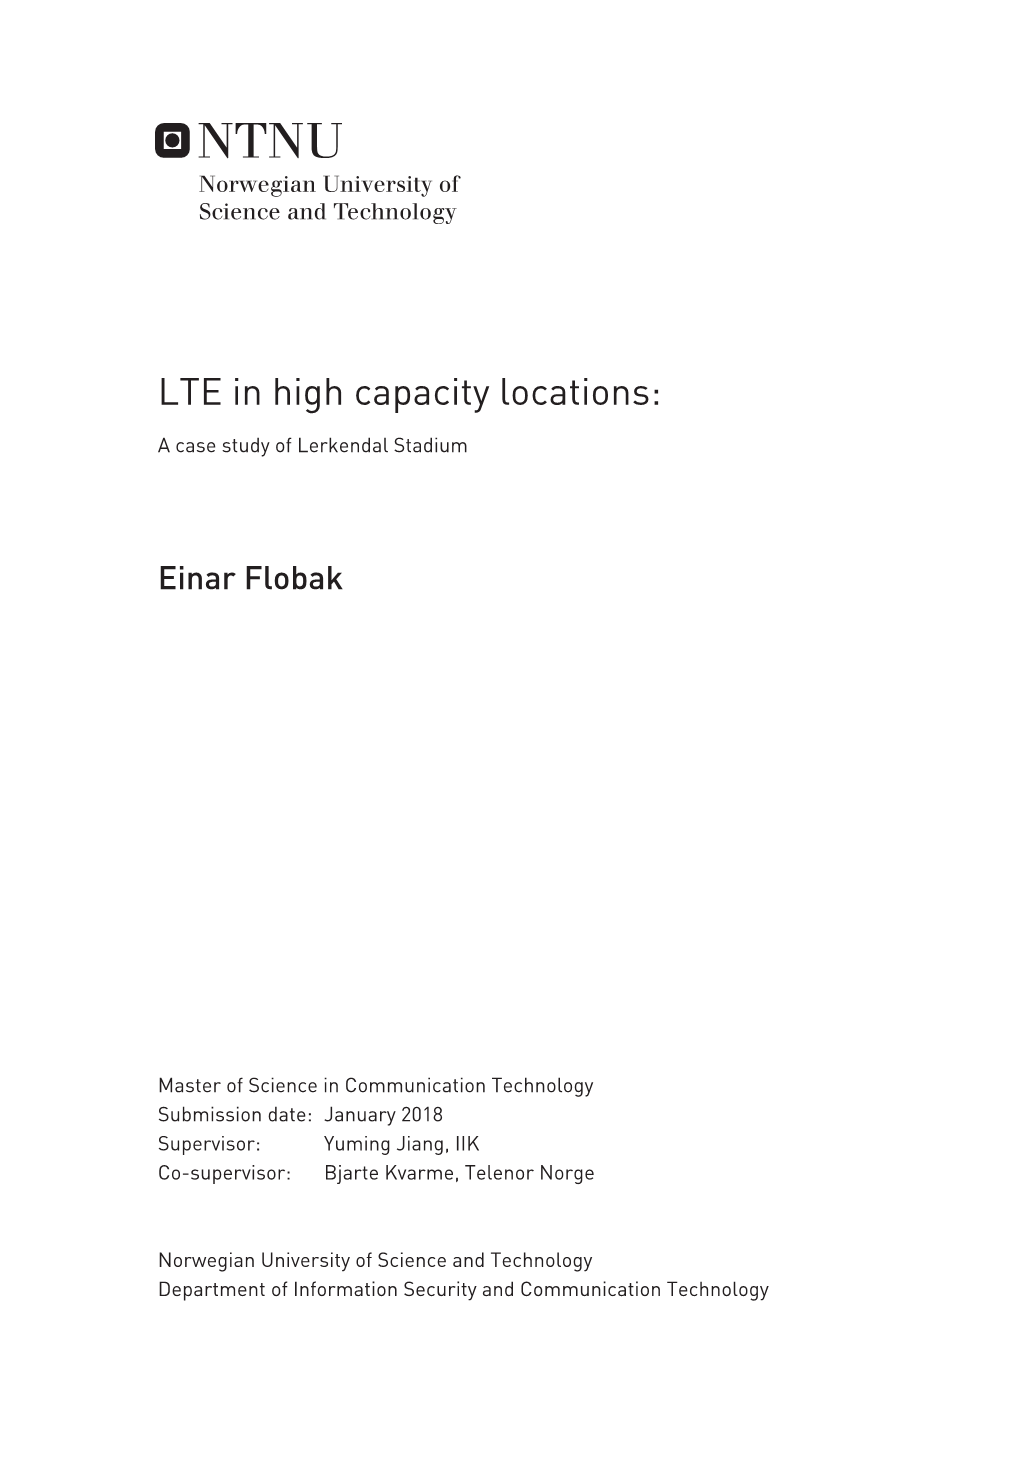 LTE in High Capacity Locations